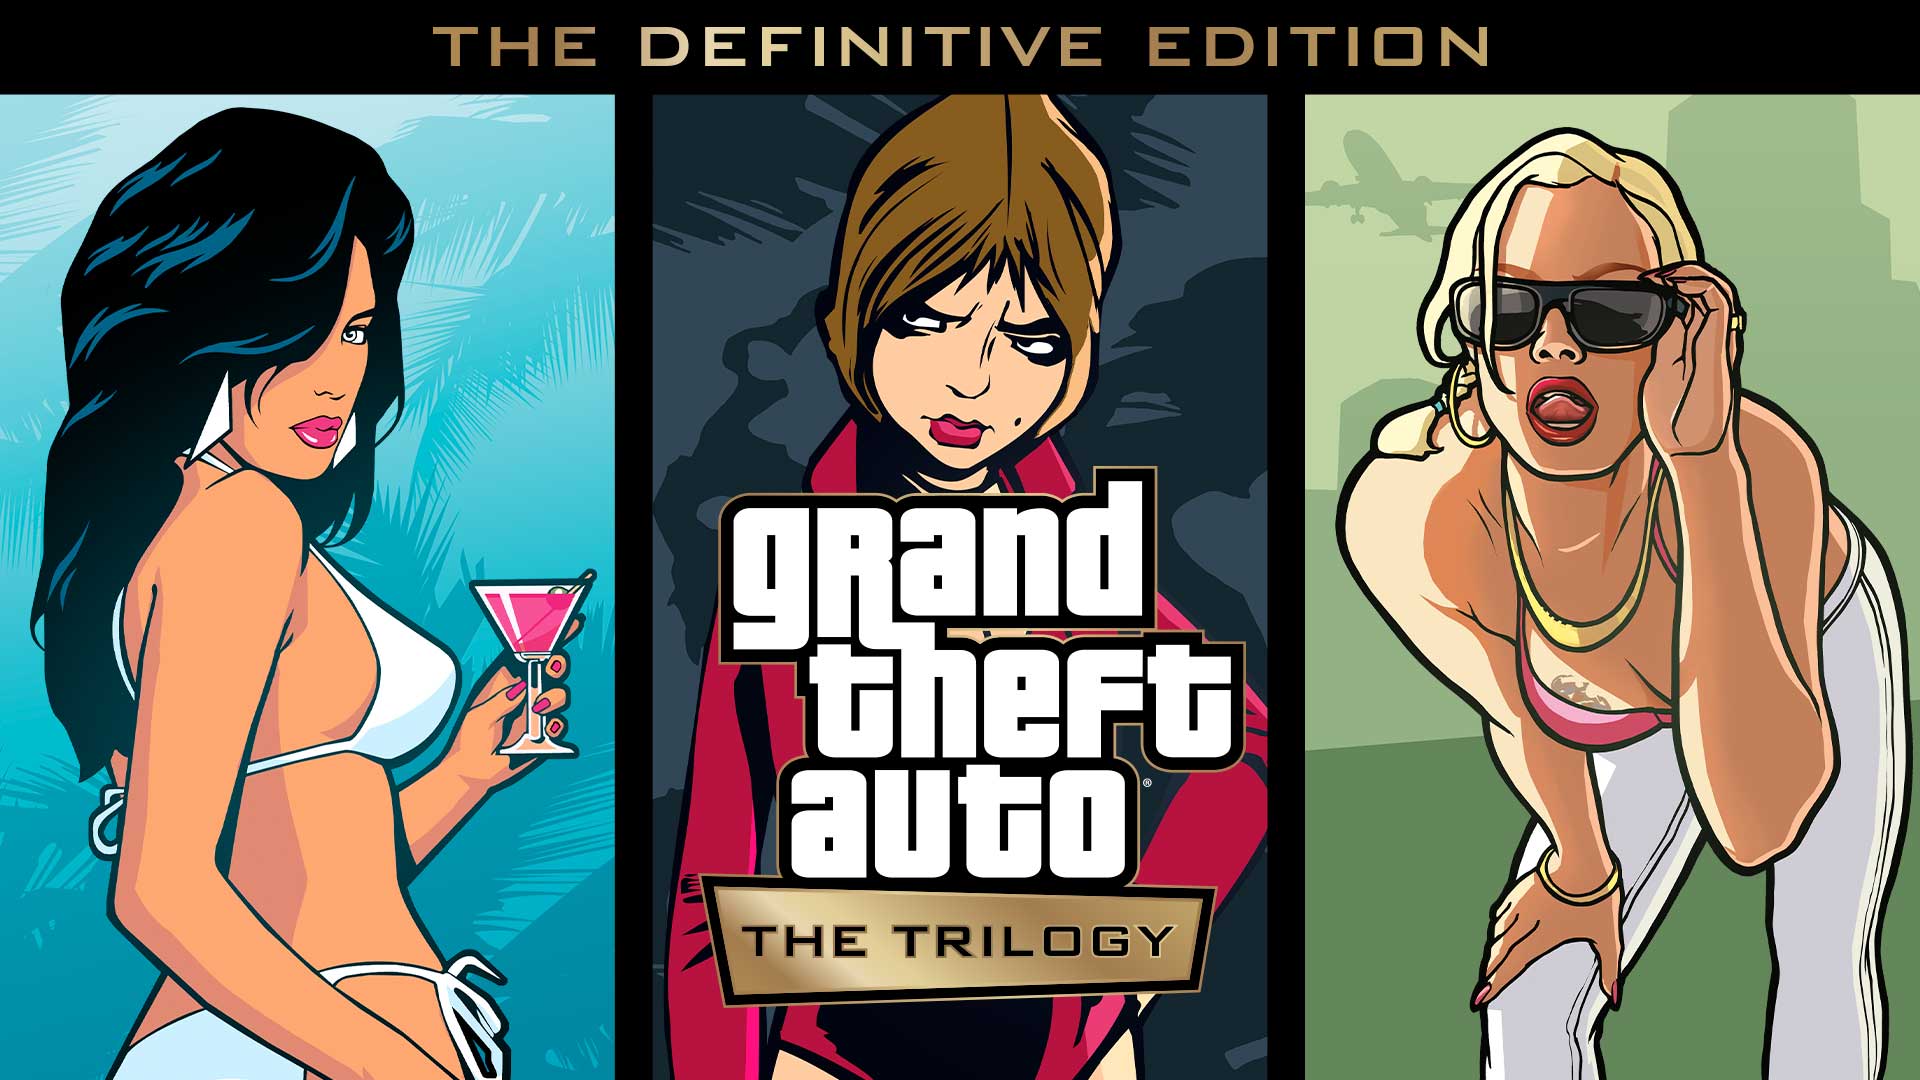 Image for Grand Theft Auto: The Trilogy - The Definitive Edition PC specs have been released